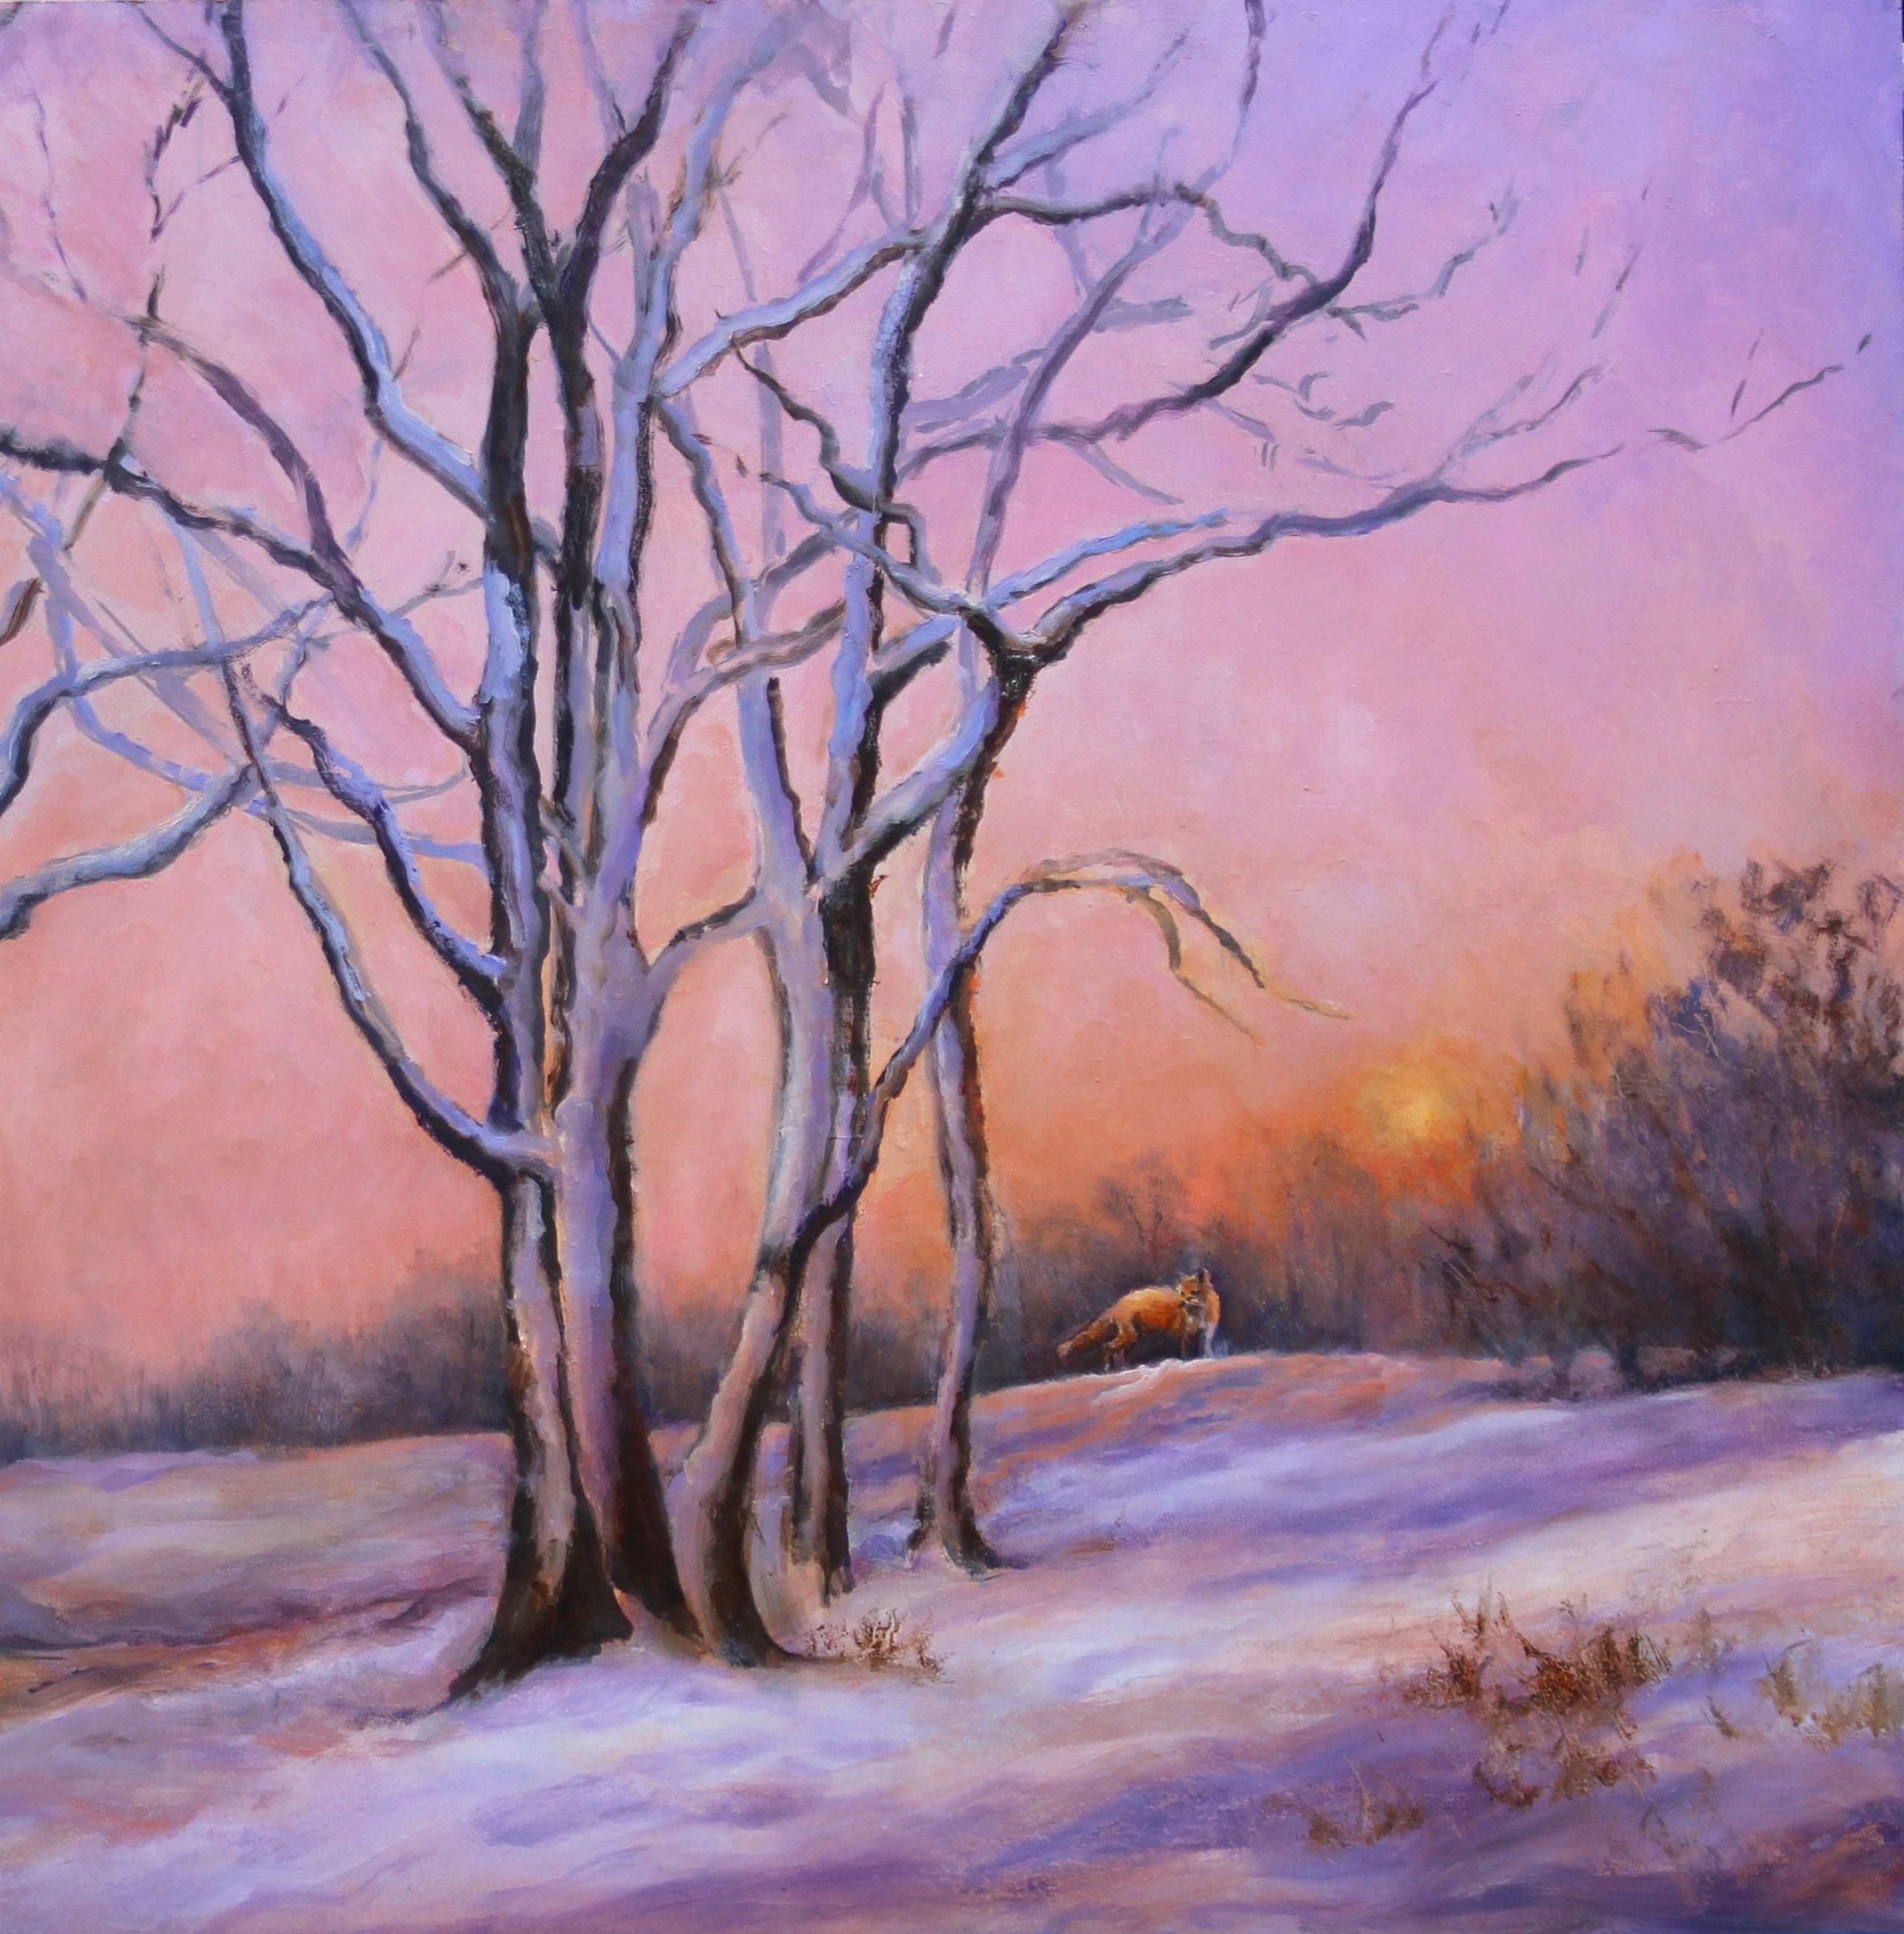 In Beth Carlson's large and mesmerizing romantic winter landscape and fox painting, 